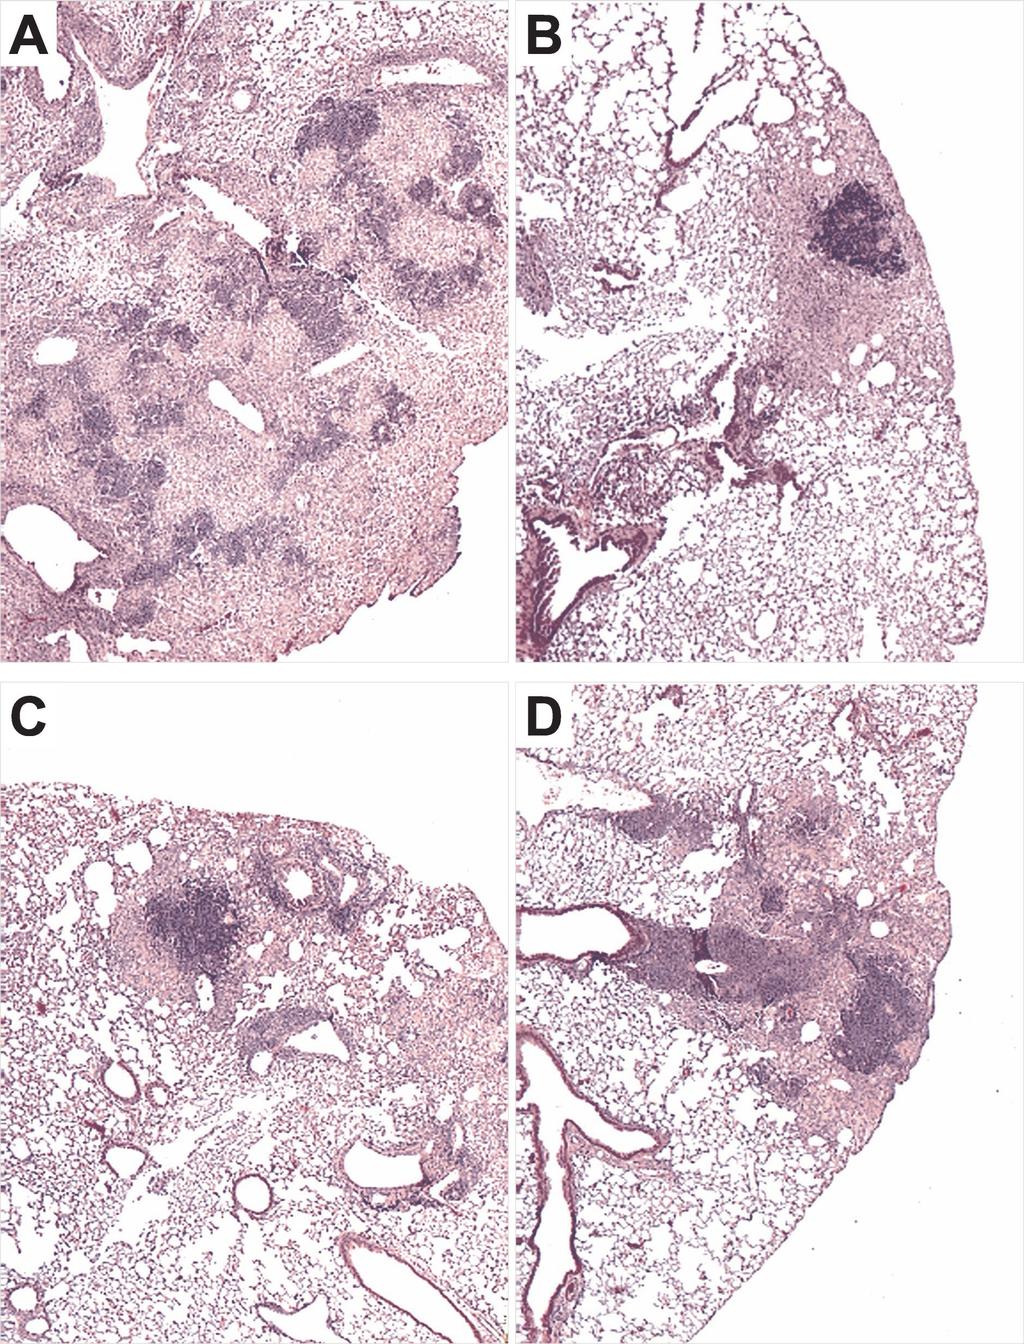 298 DELOGU ET AL. INFECT. IMMUN. FIG. 4. Histopathological analysis of lungs from vaccinated mice obtained 63 days following M. tuberculosis challenge.